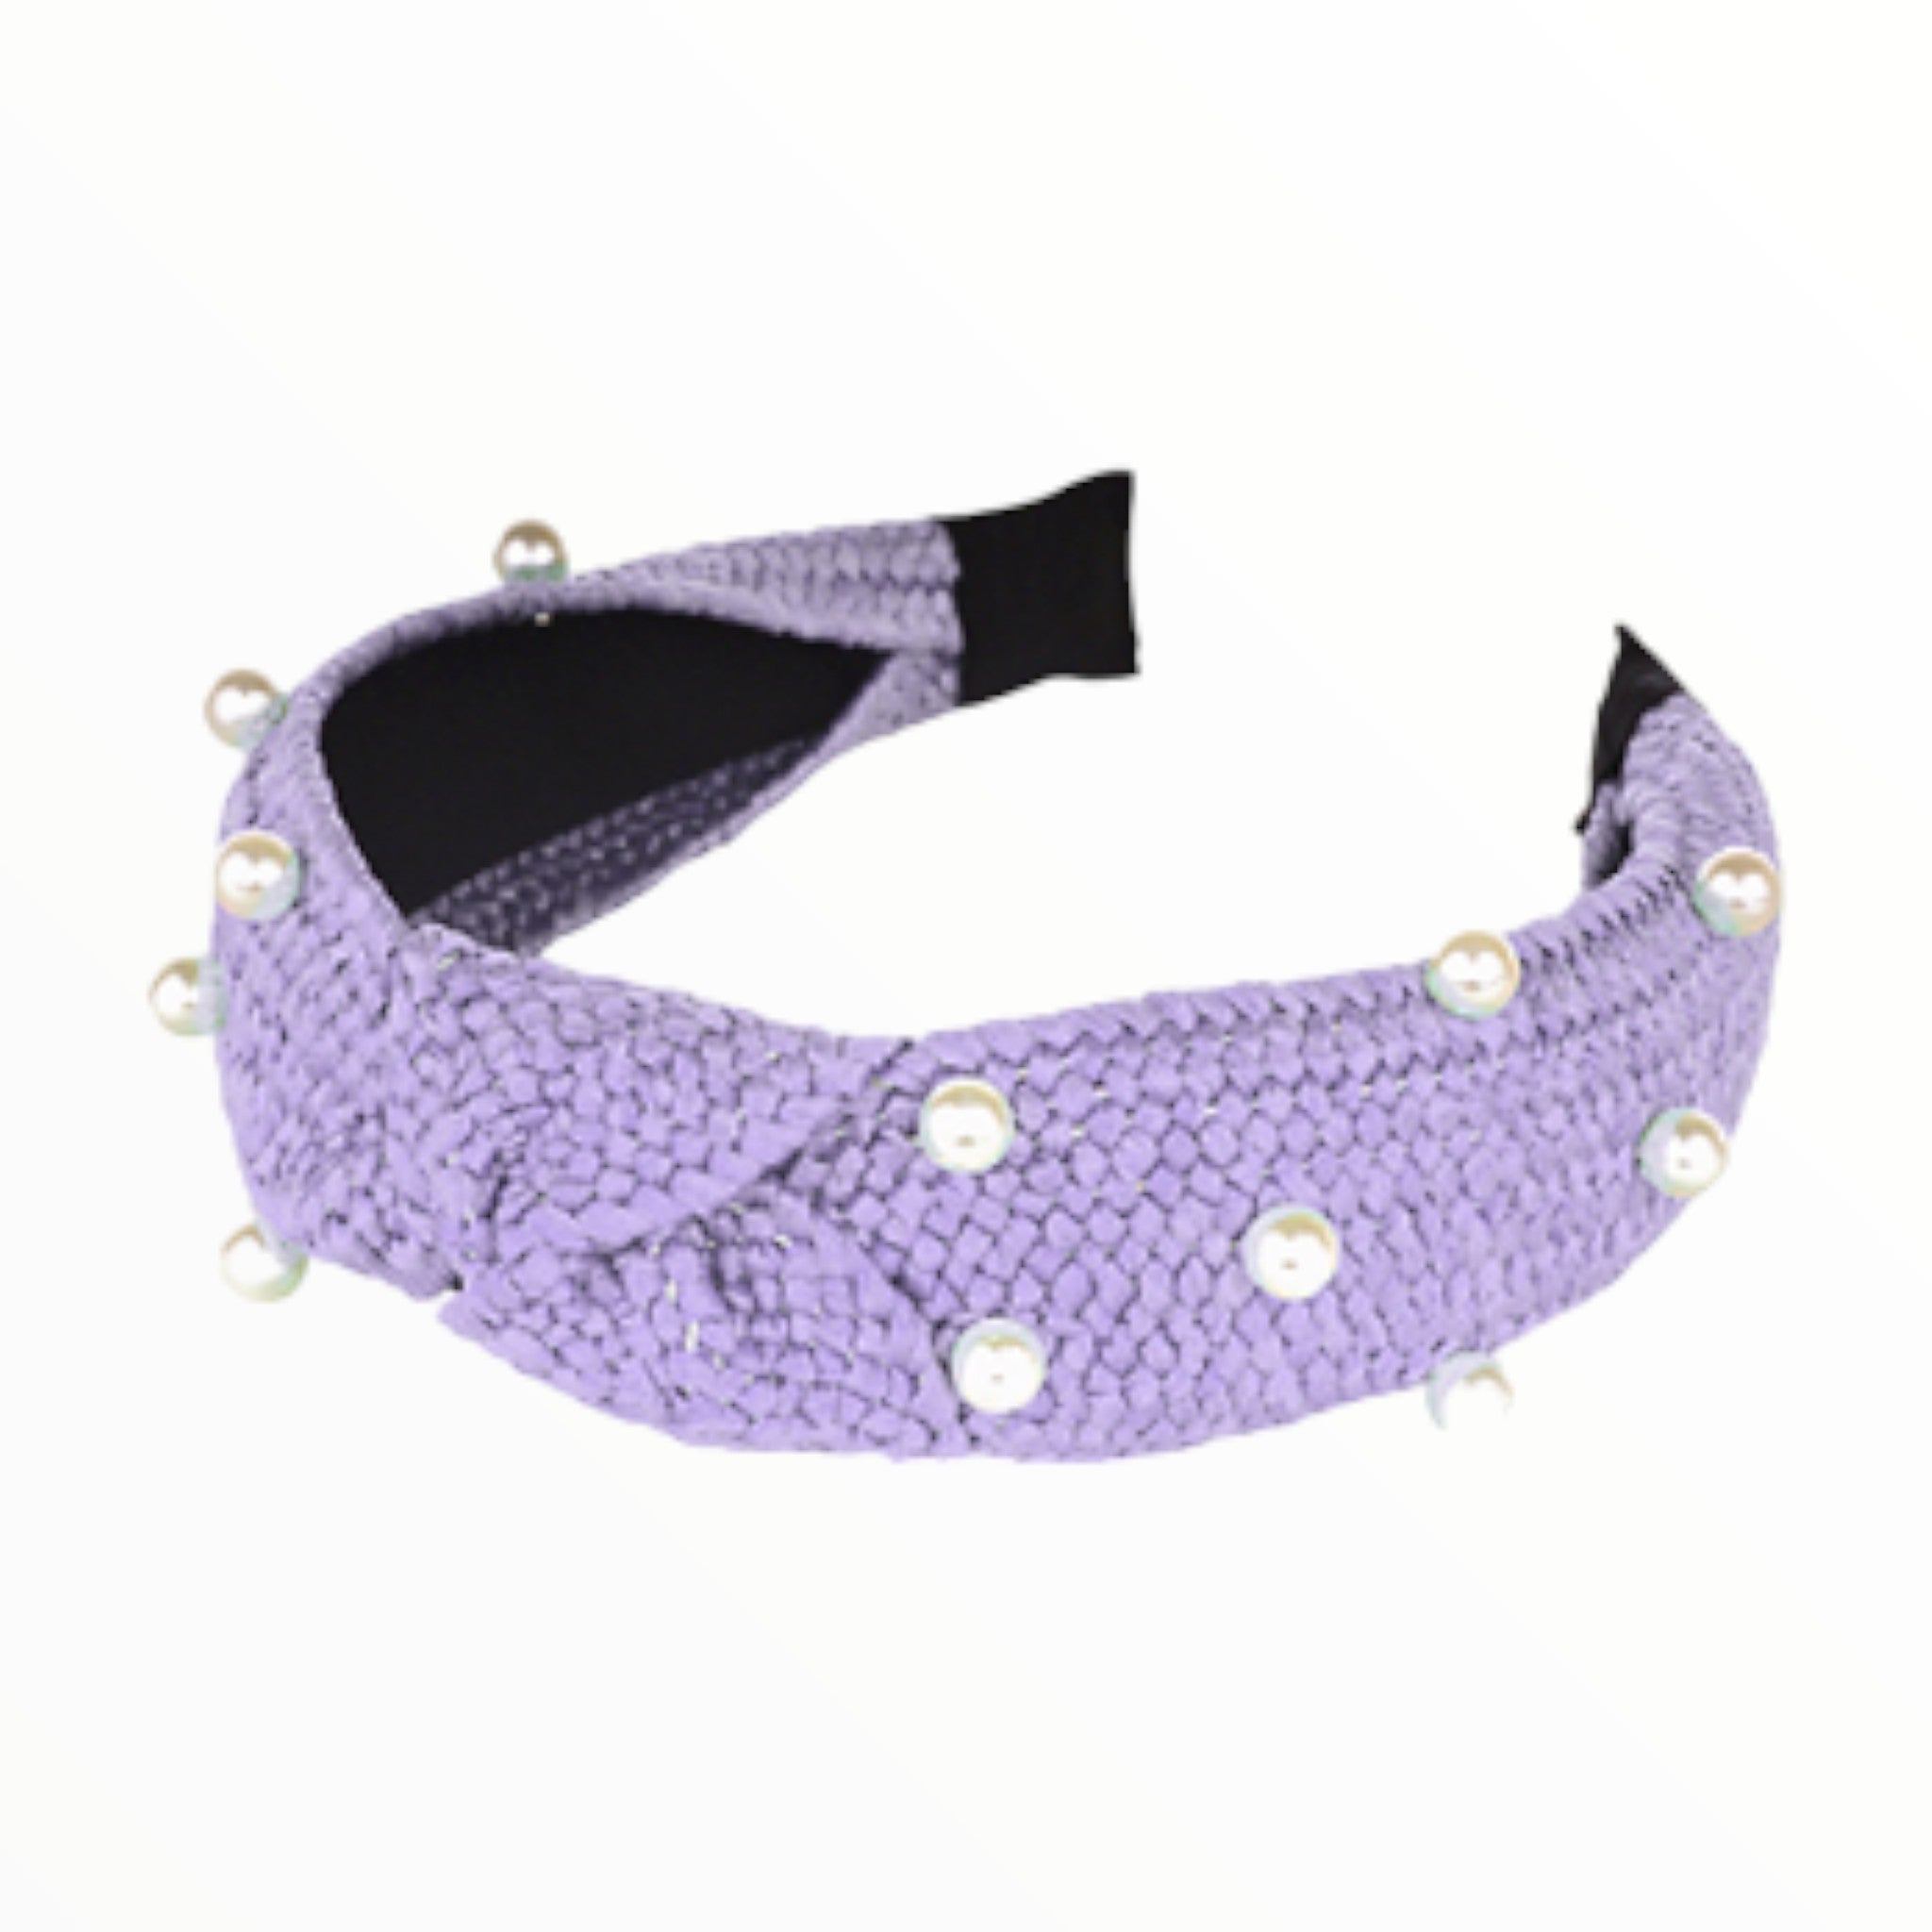 Lavender Pearl Embellished Top Knot Headband-Accessories-LouisGeorge Boutique-LouisGeorge Boutique, Women’s Fashion Boutique Located in Trussville, Alabama